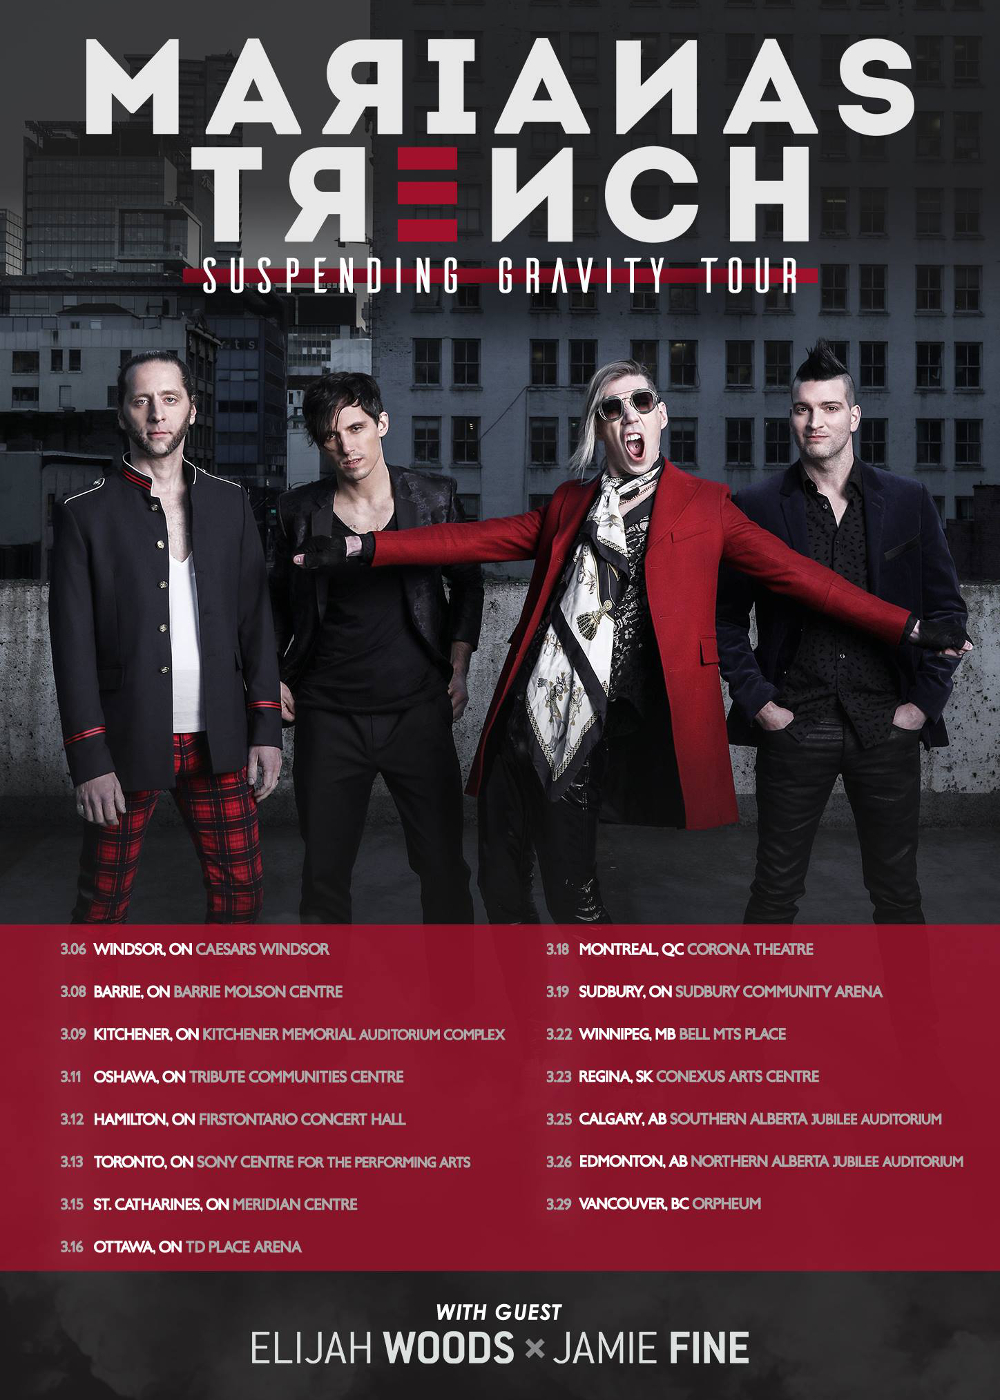 Marianas Trench Suspending Gravity Tour Poster